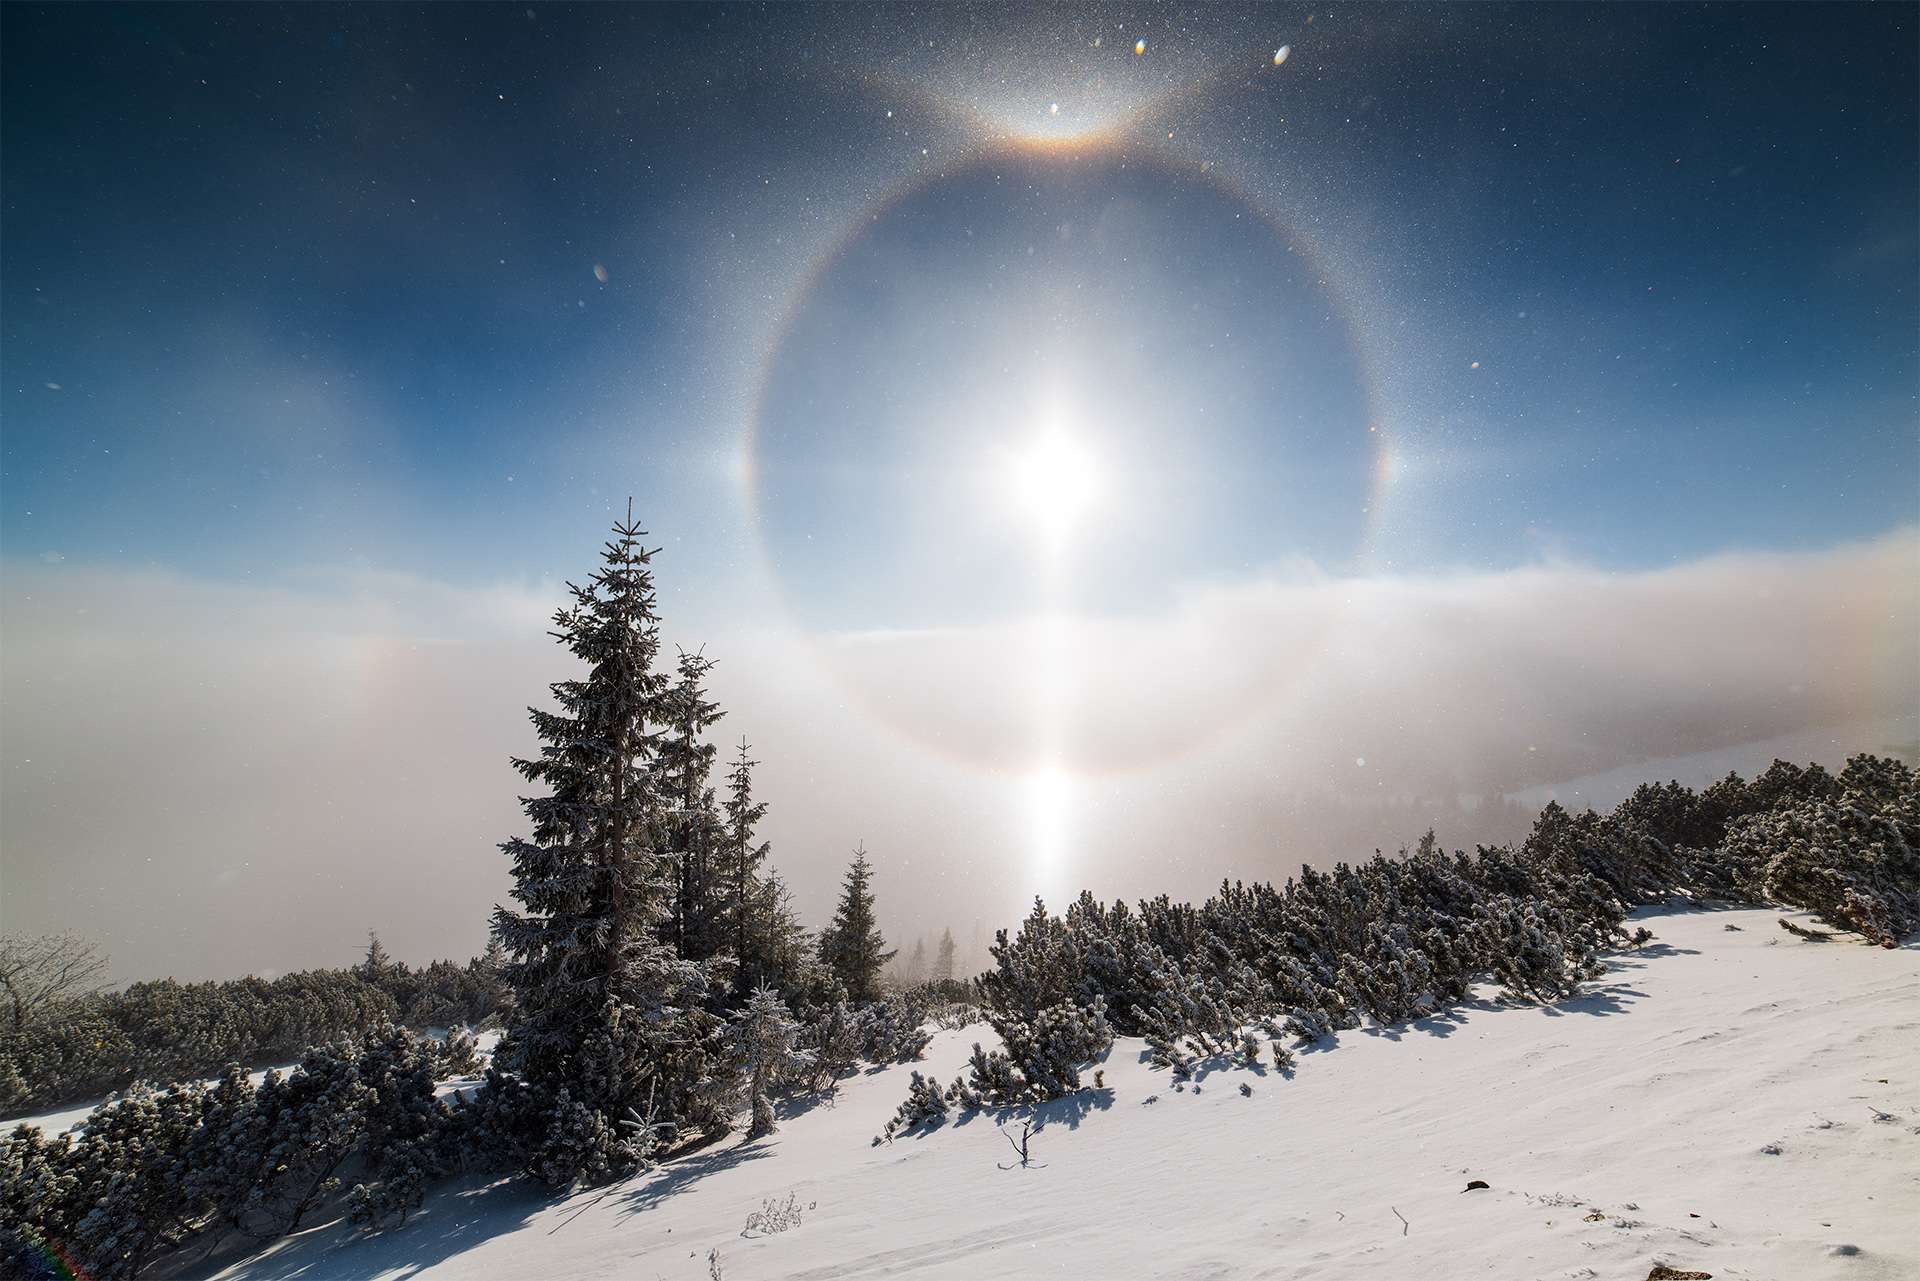 Sun dog Halo effect around winter morning sun, clouds inversion and snow covered trees